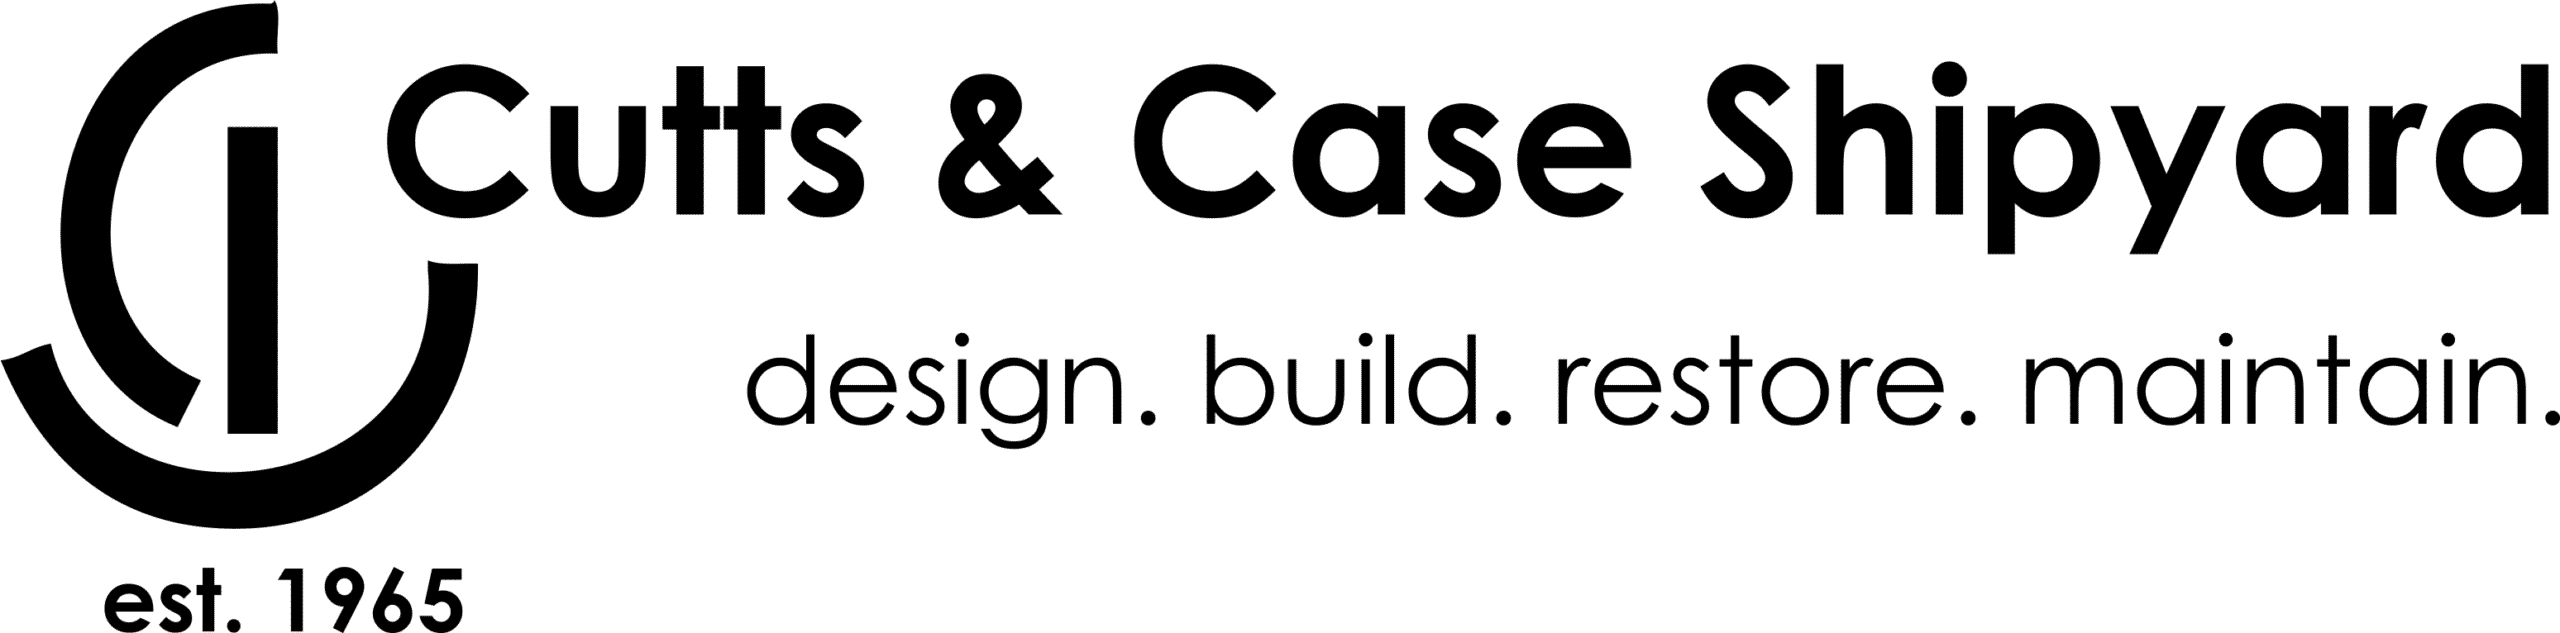 Cutts and Case Services